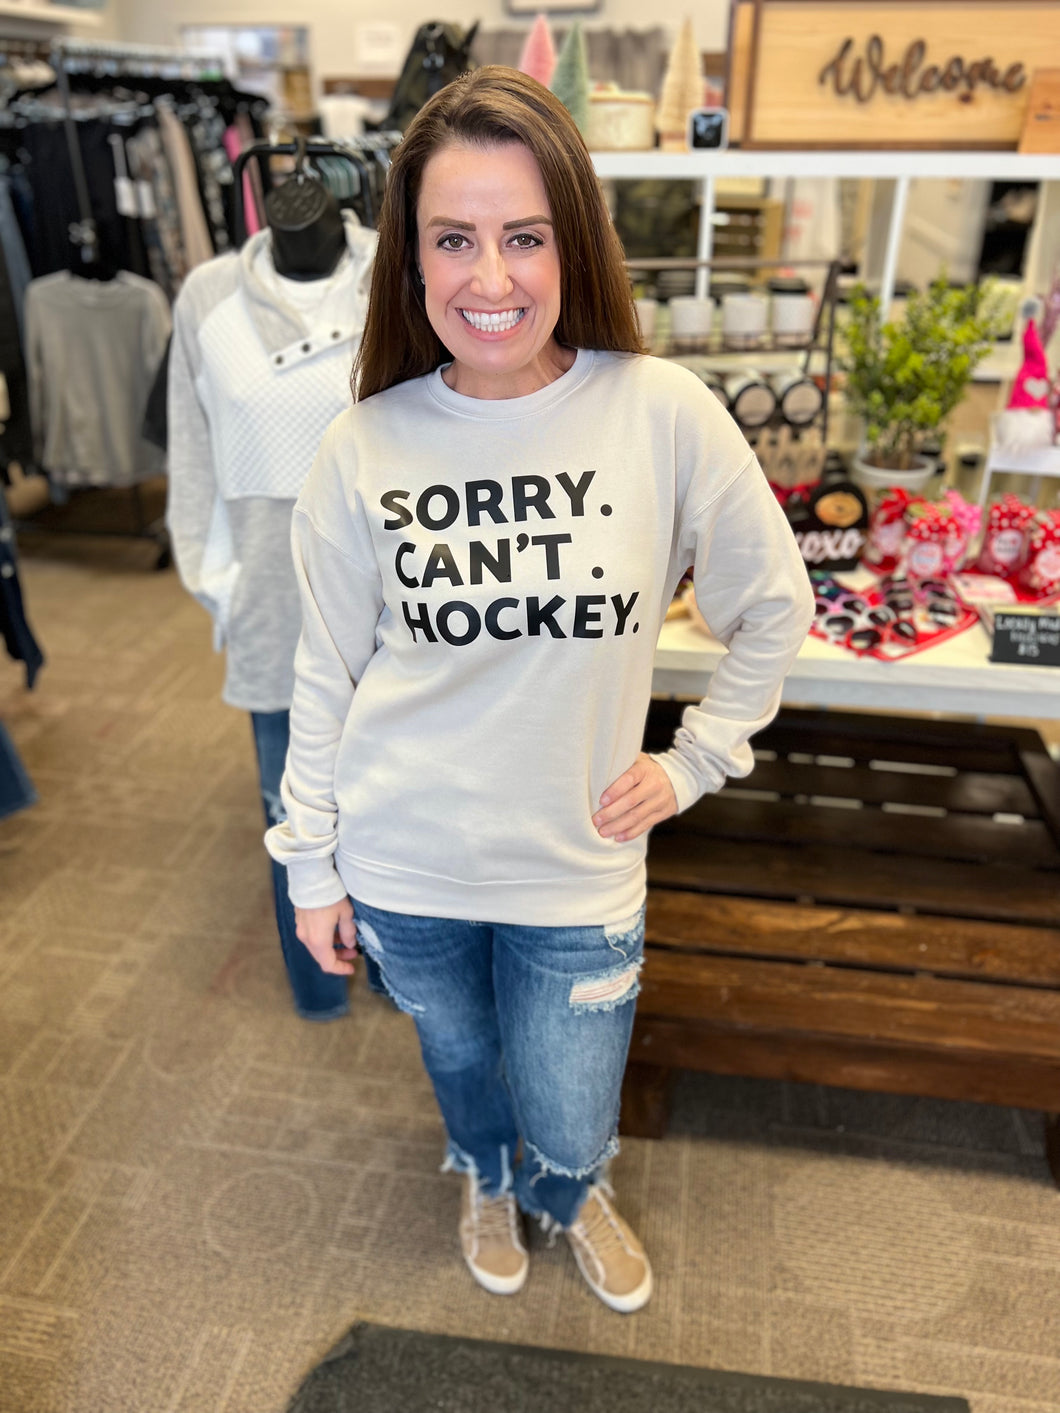 Sorry. Can't. Hockey.